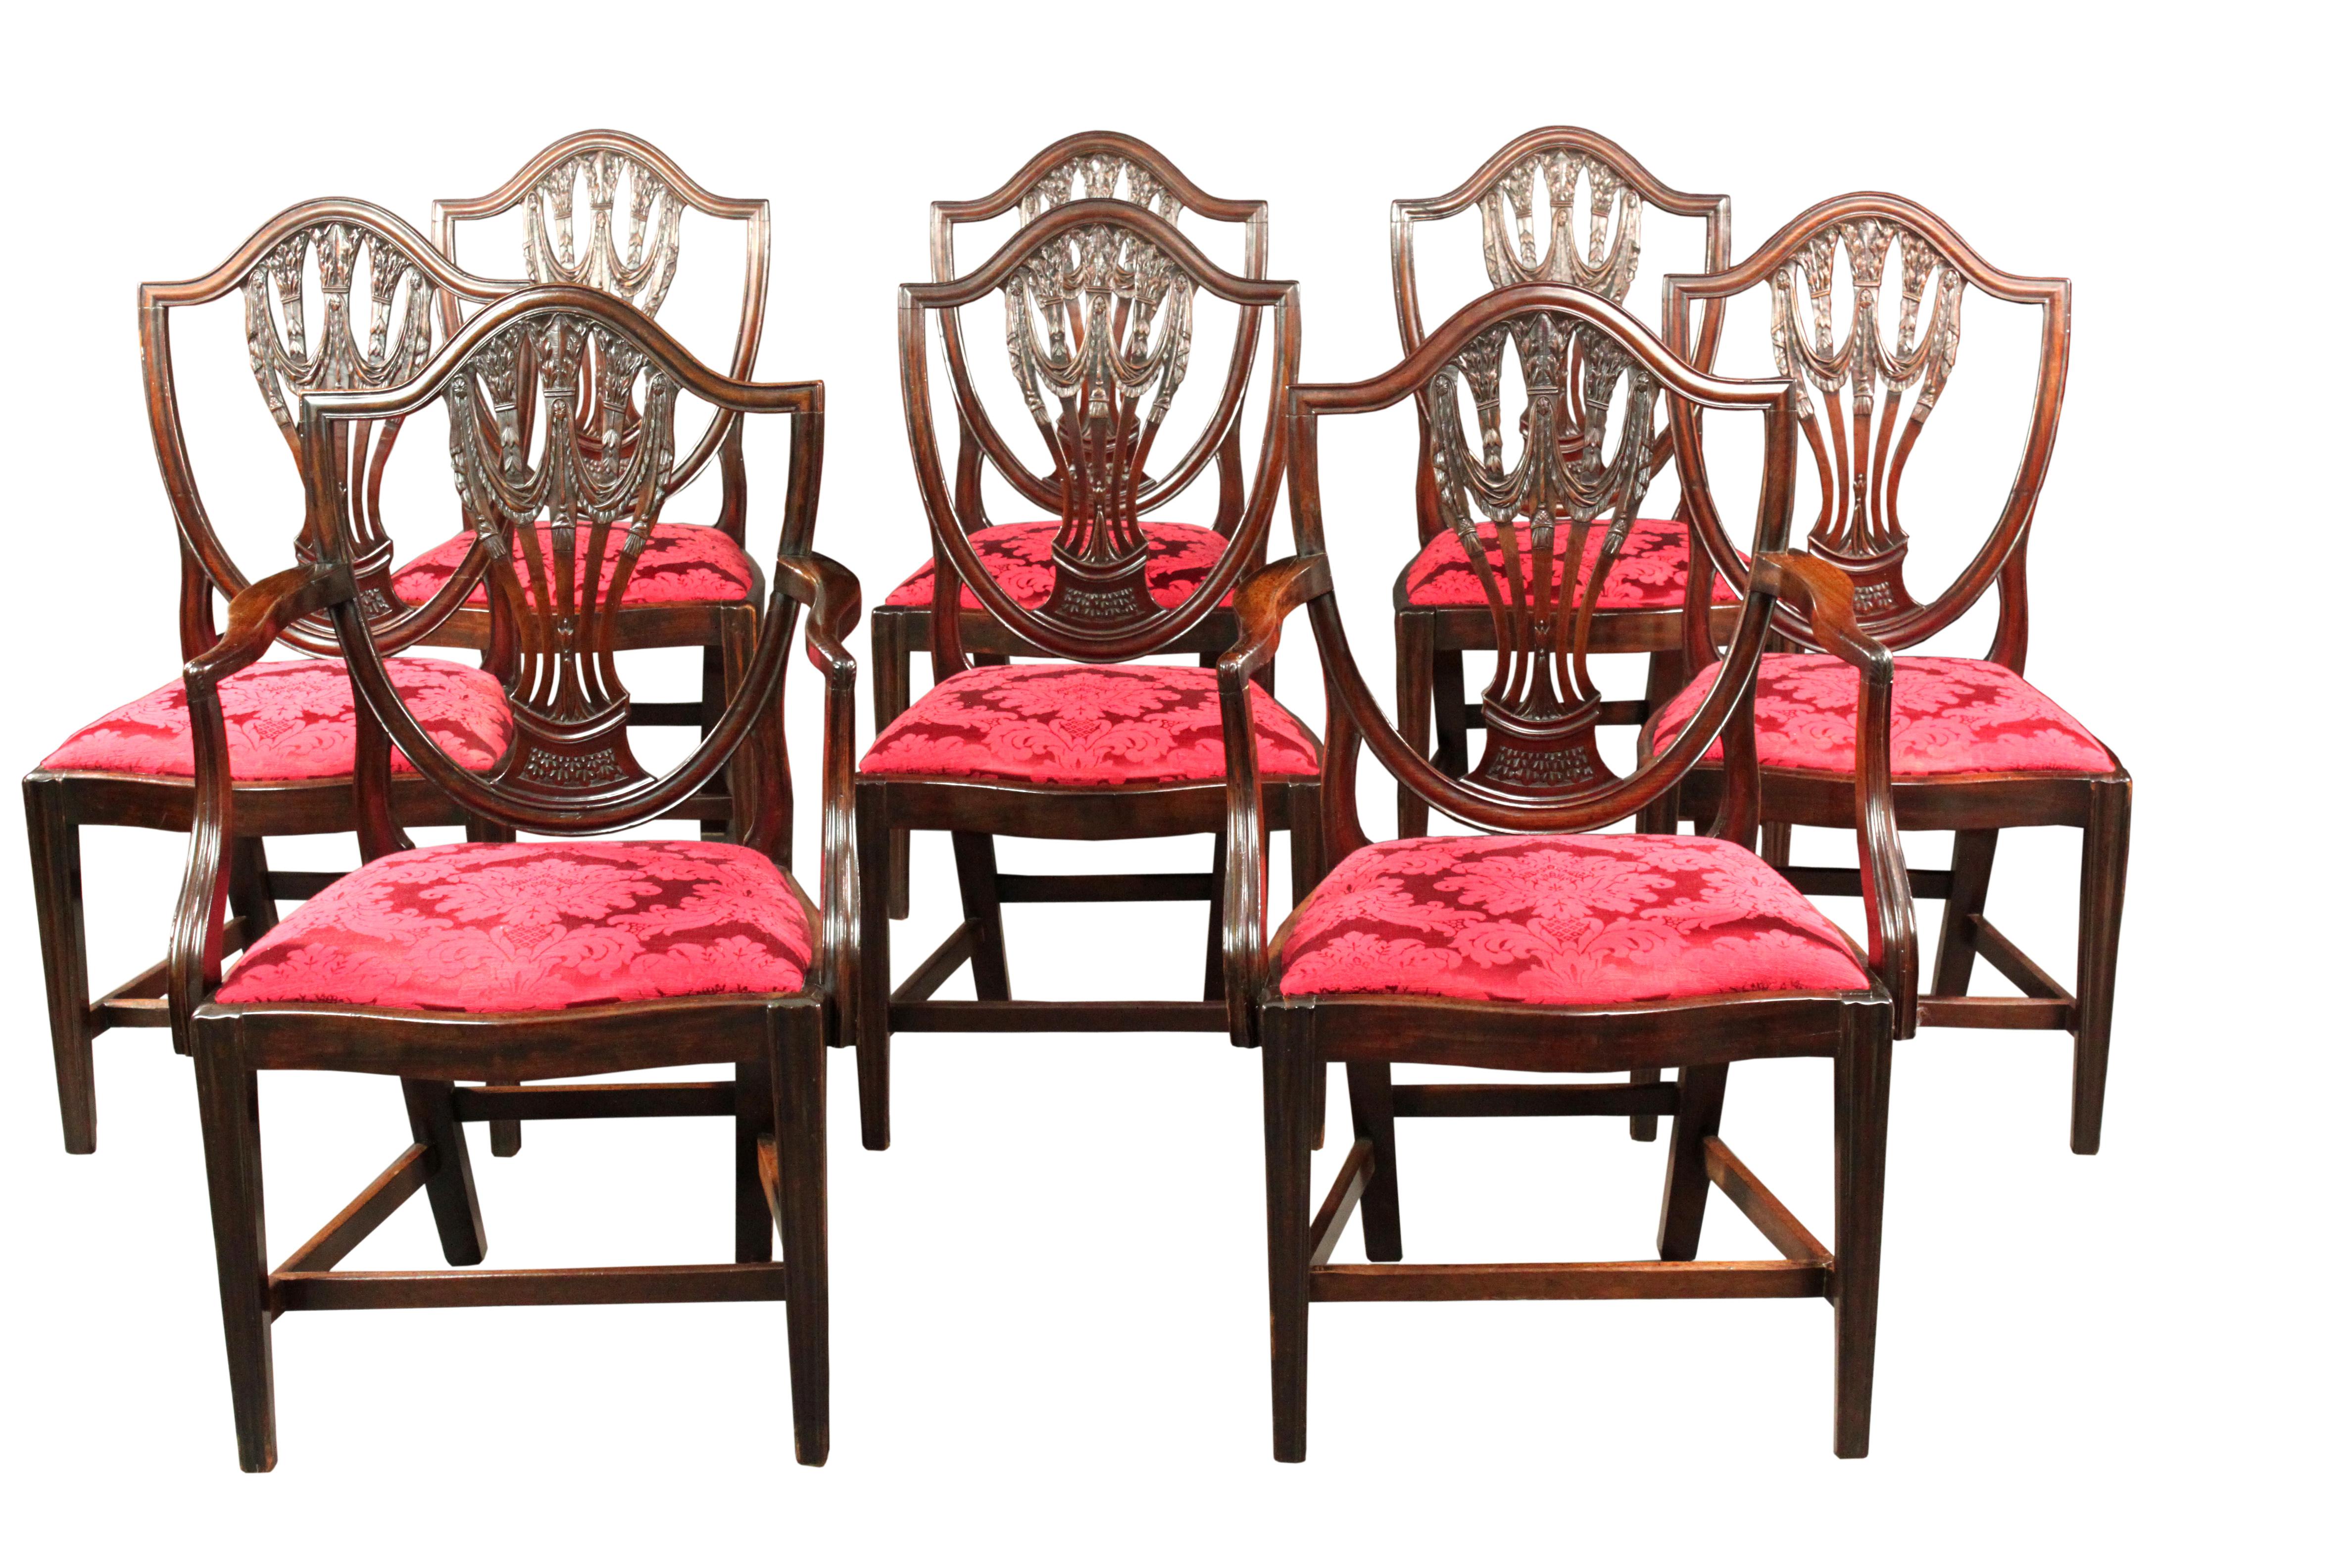 A fine quality set of 8 George III dining chairs with particularly well-carved shield backs, serpentine front rails and moulded front legs. Original condition and made in good quality, mahogany of a rich color and patina.
Provenance: from a